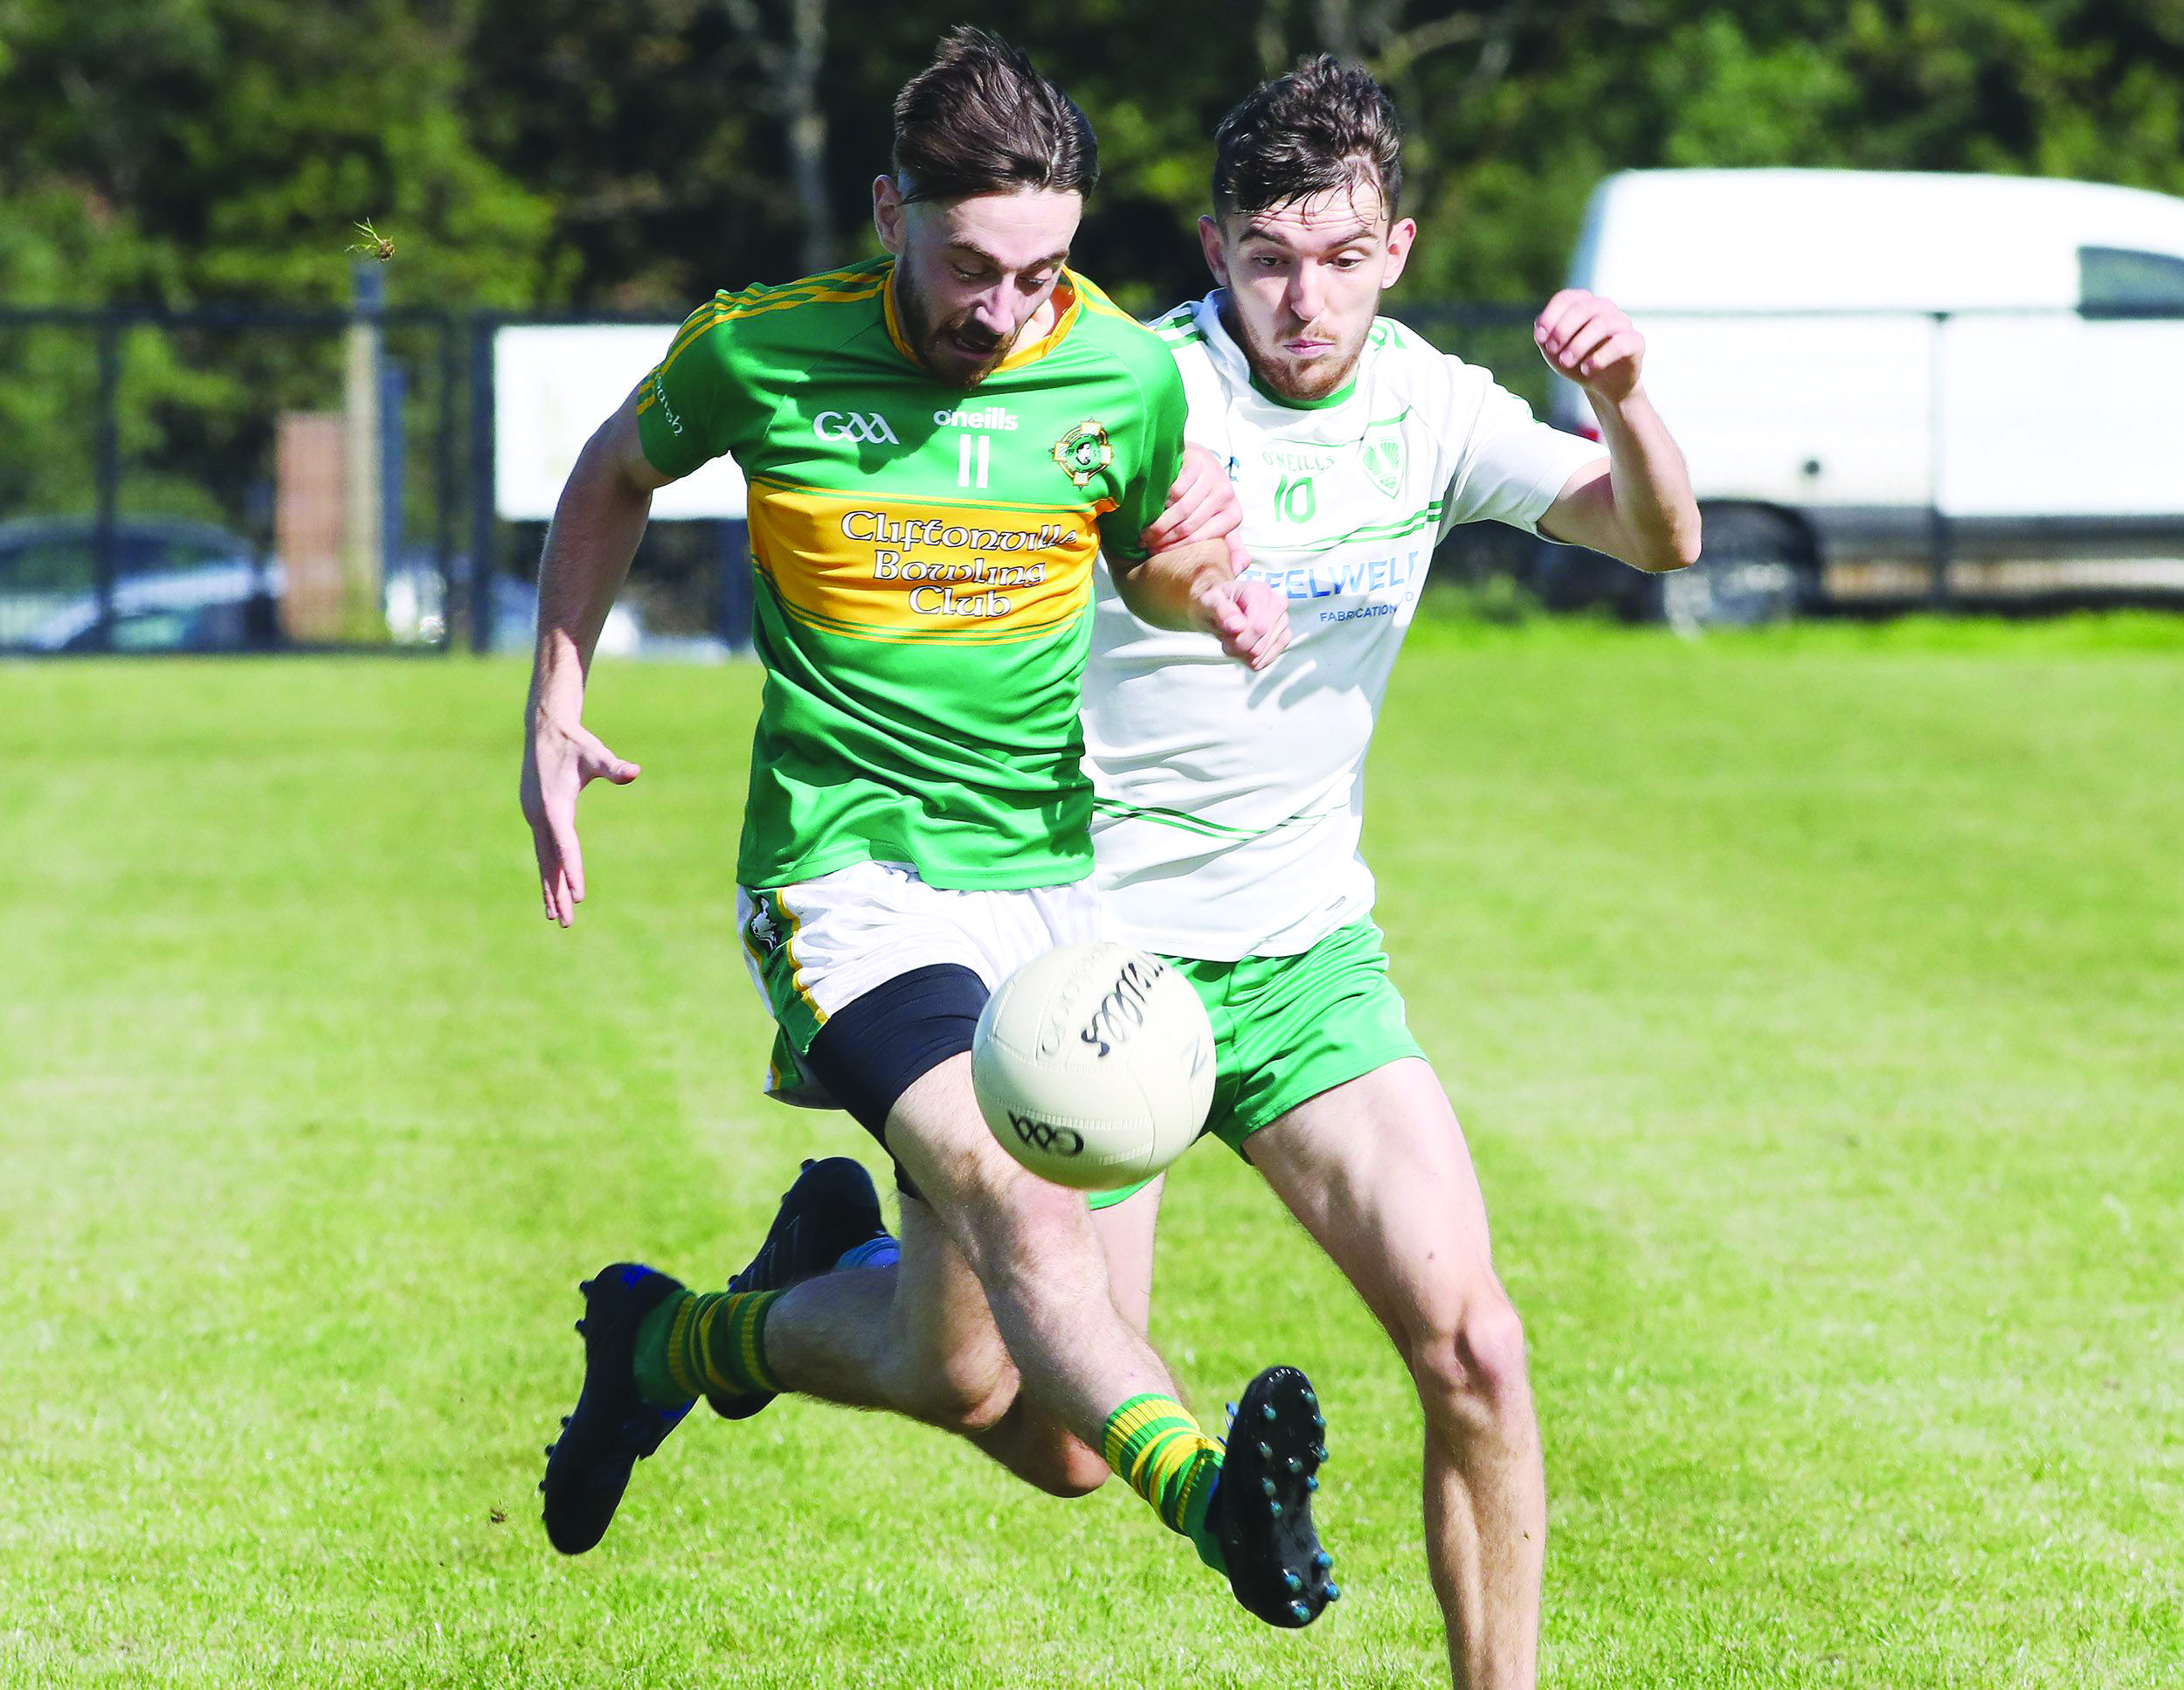 Pearse’s came up short against St Comgall’s in last year’s semi-final